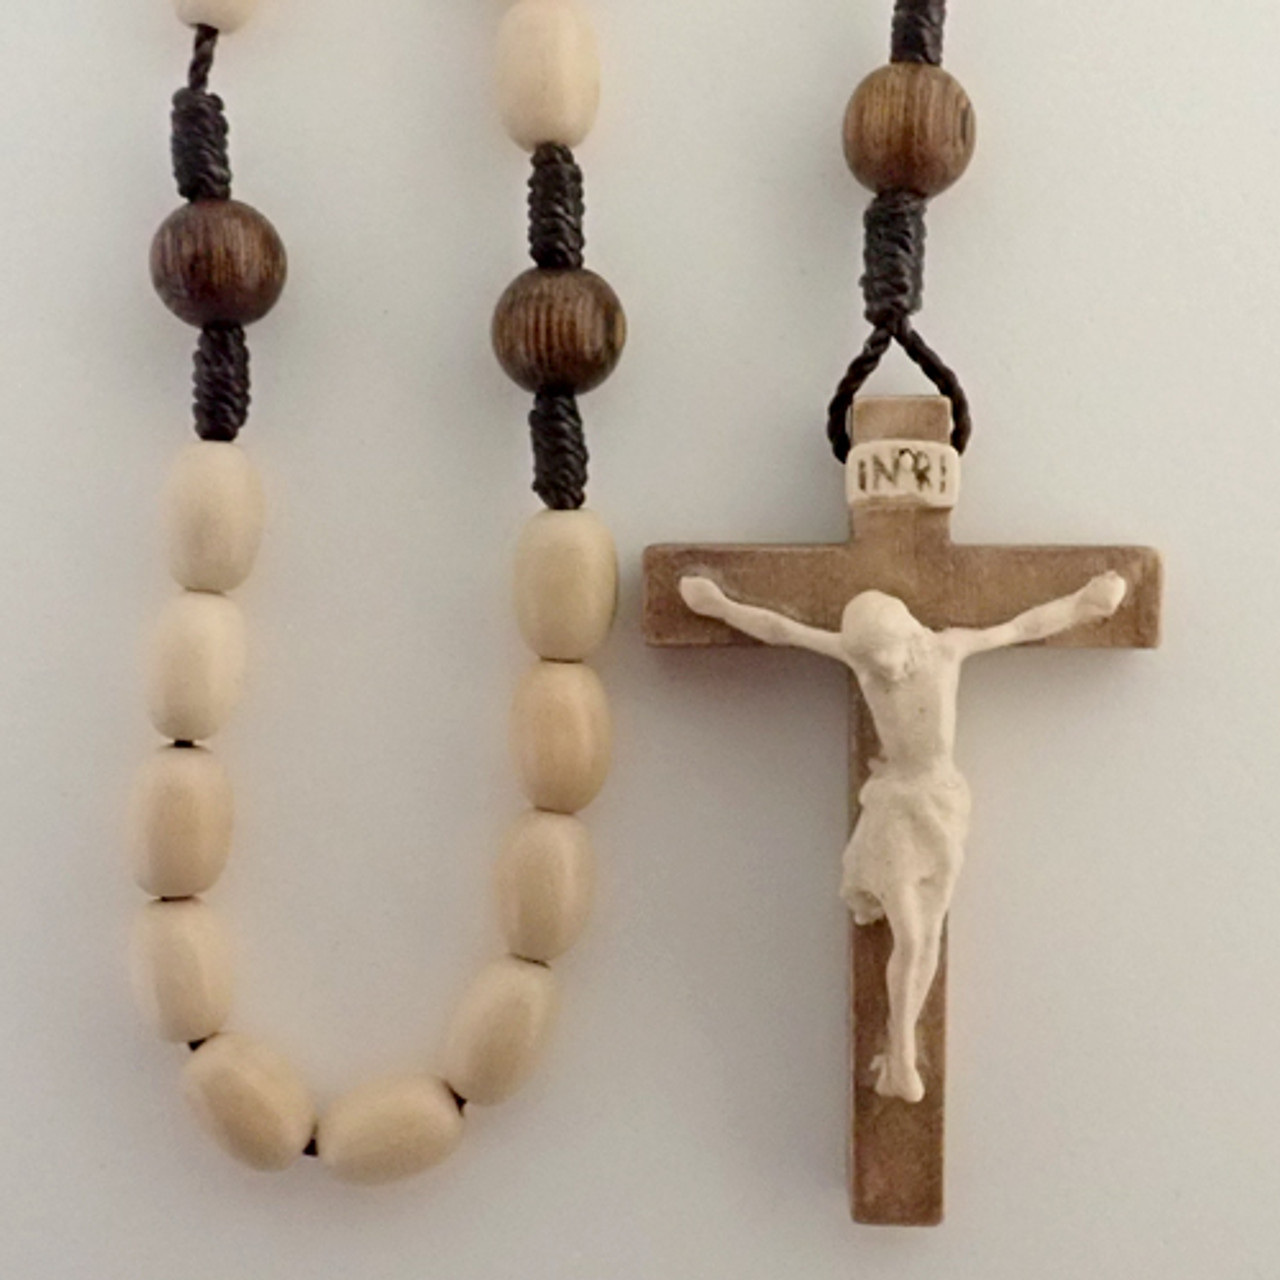 https://cdn11.bigcommerce.com/s-7251z/images/stencil/1280x1280/products/4724/9022/natural-wood-cord-rosary__34059.1628784471.jpg?c=2